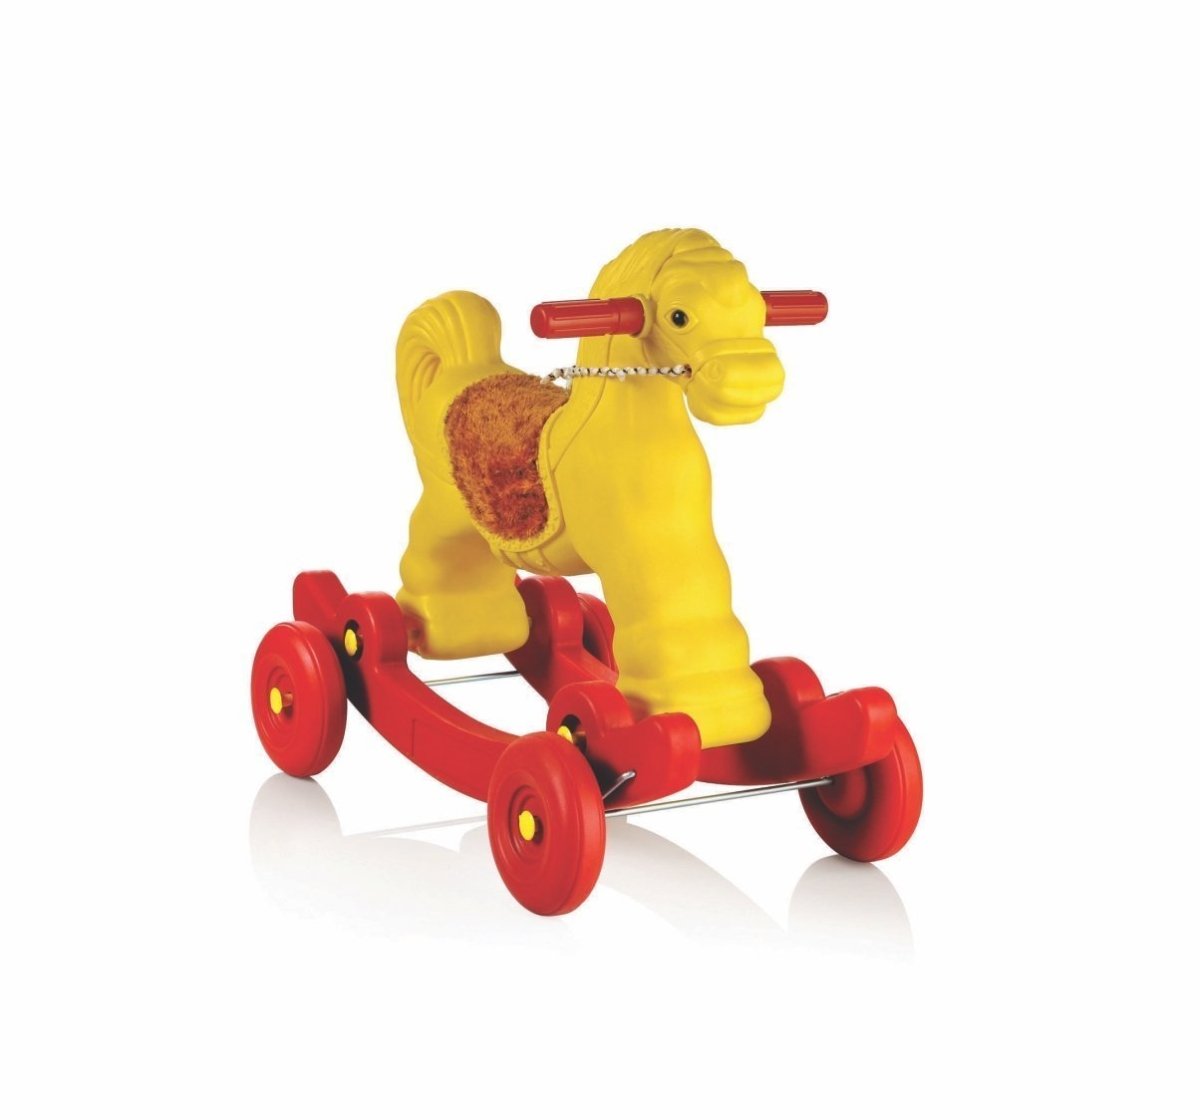 OK Play Rocking Horse Chair - Yellow Red - FTFT000207